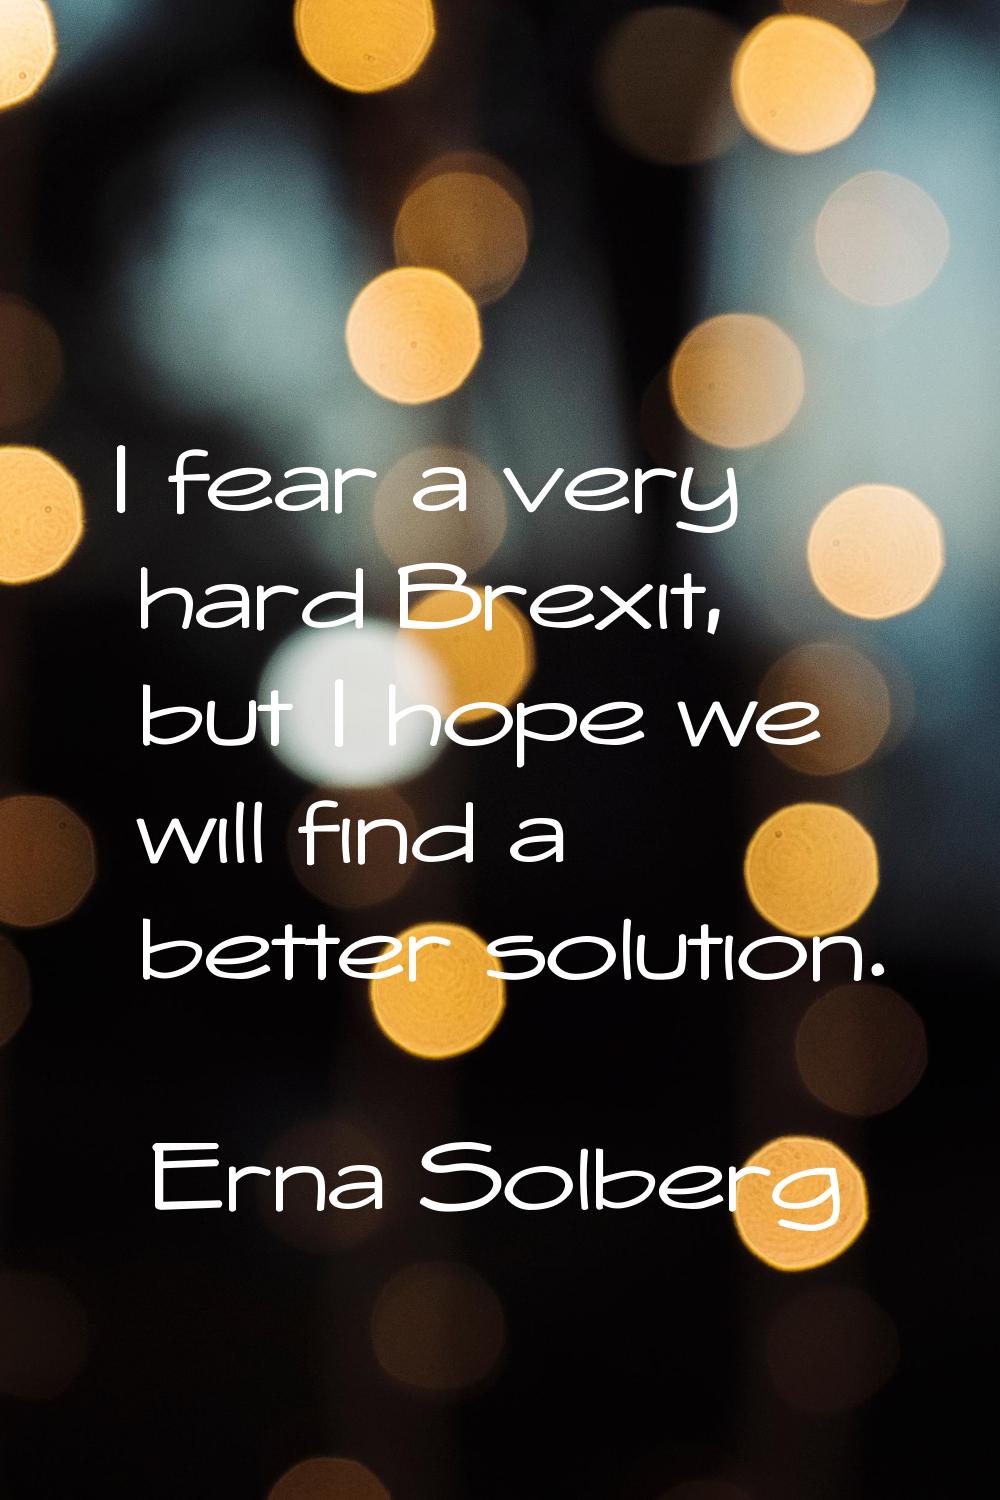 I fear a very hard Brexit, but I hope we will find a better solution.